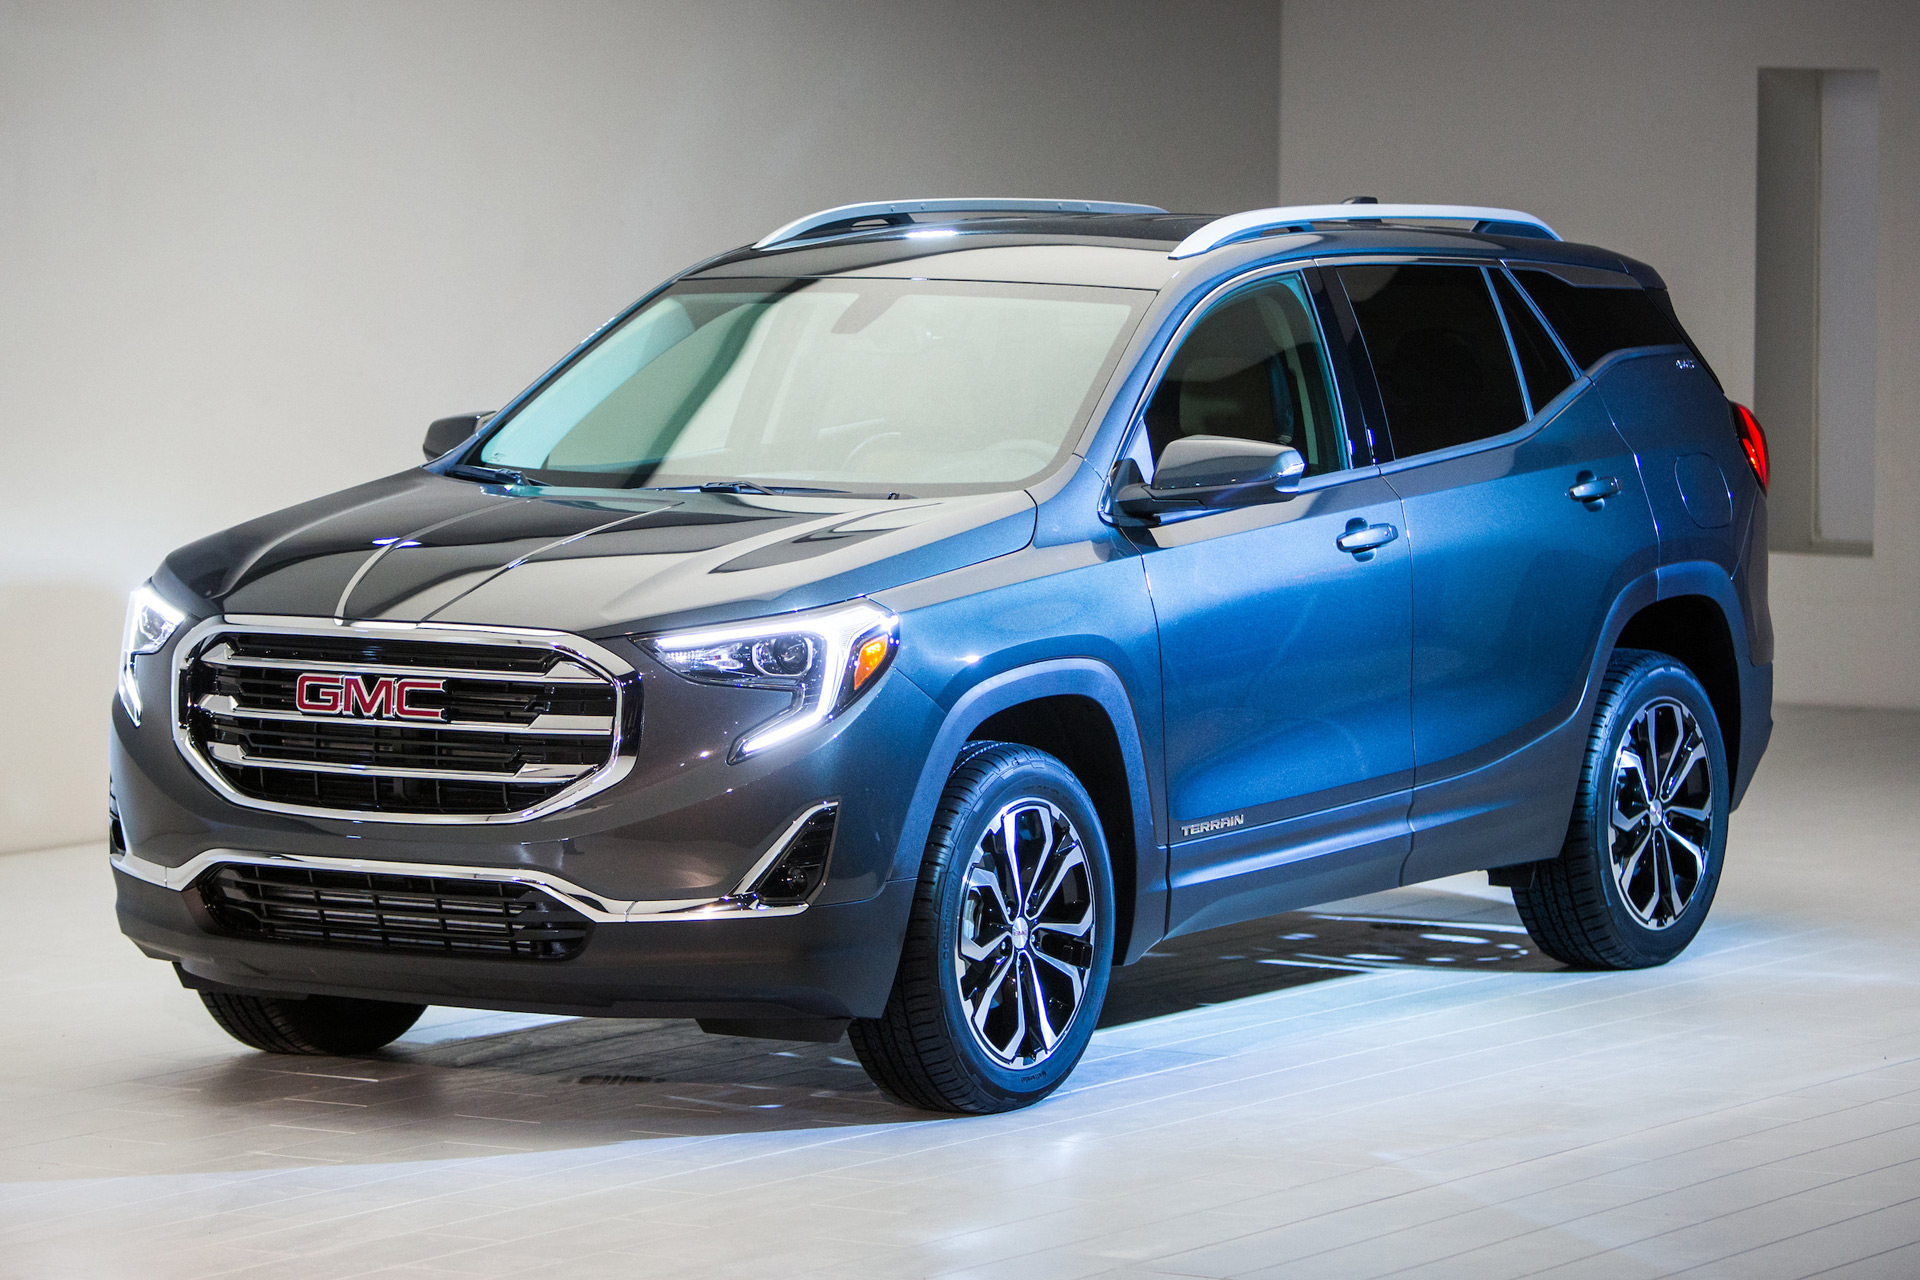 2018 GMC Terrain prices and expert review - The Car Connection